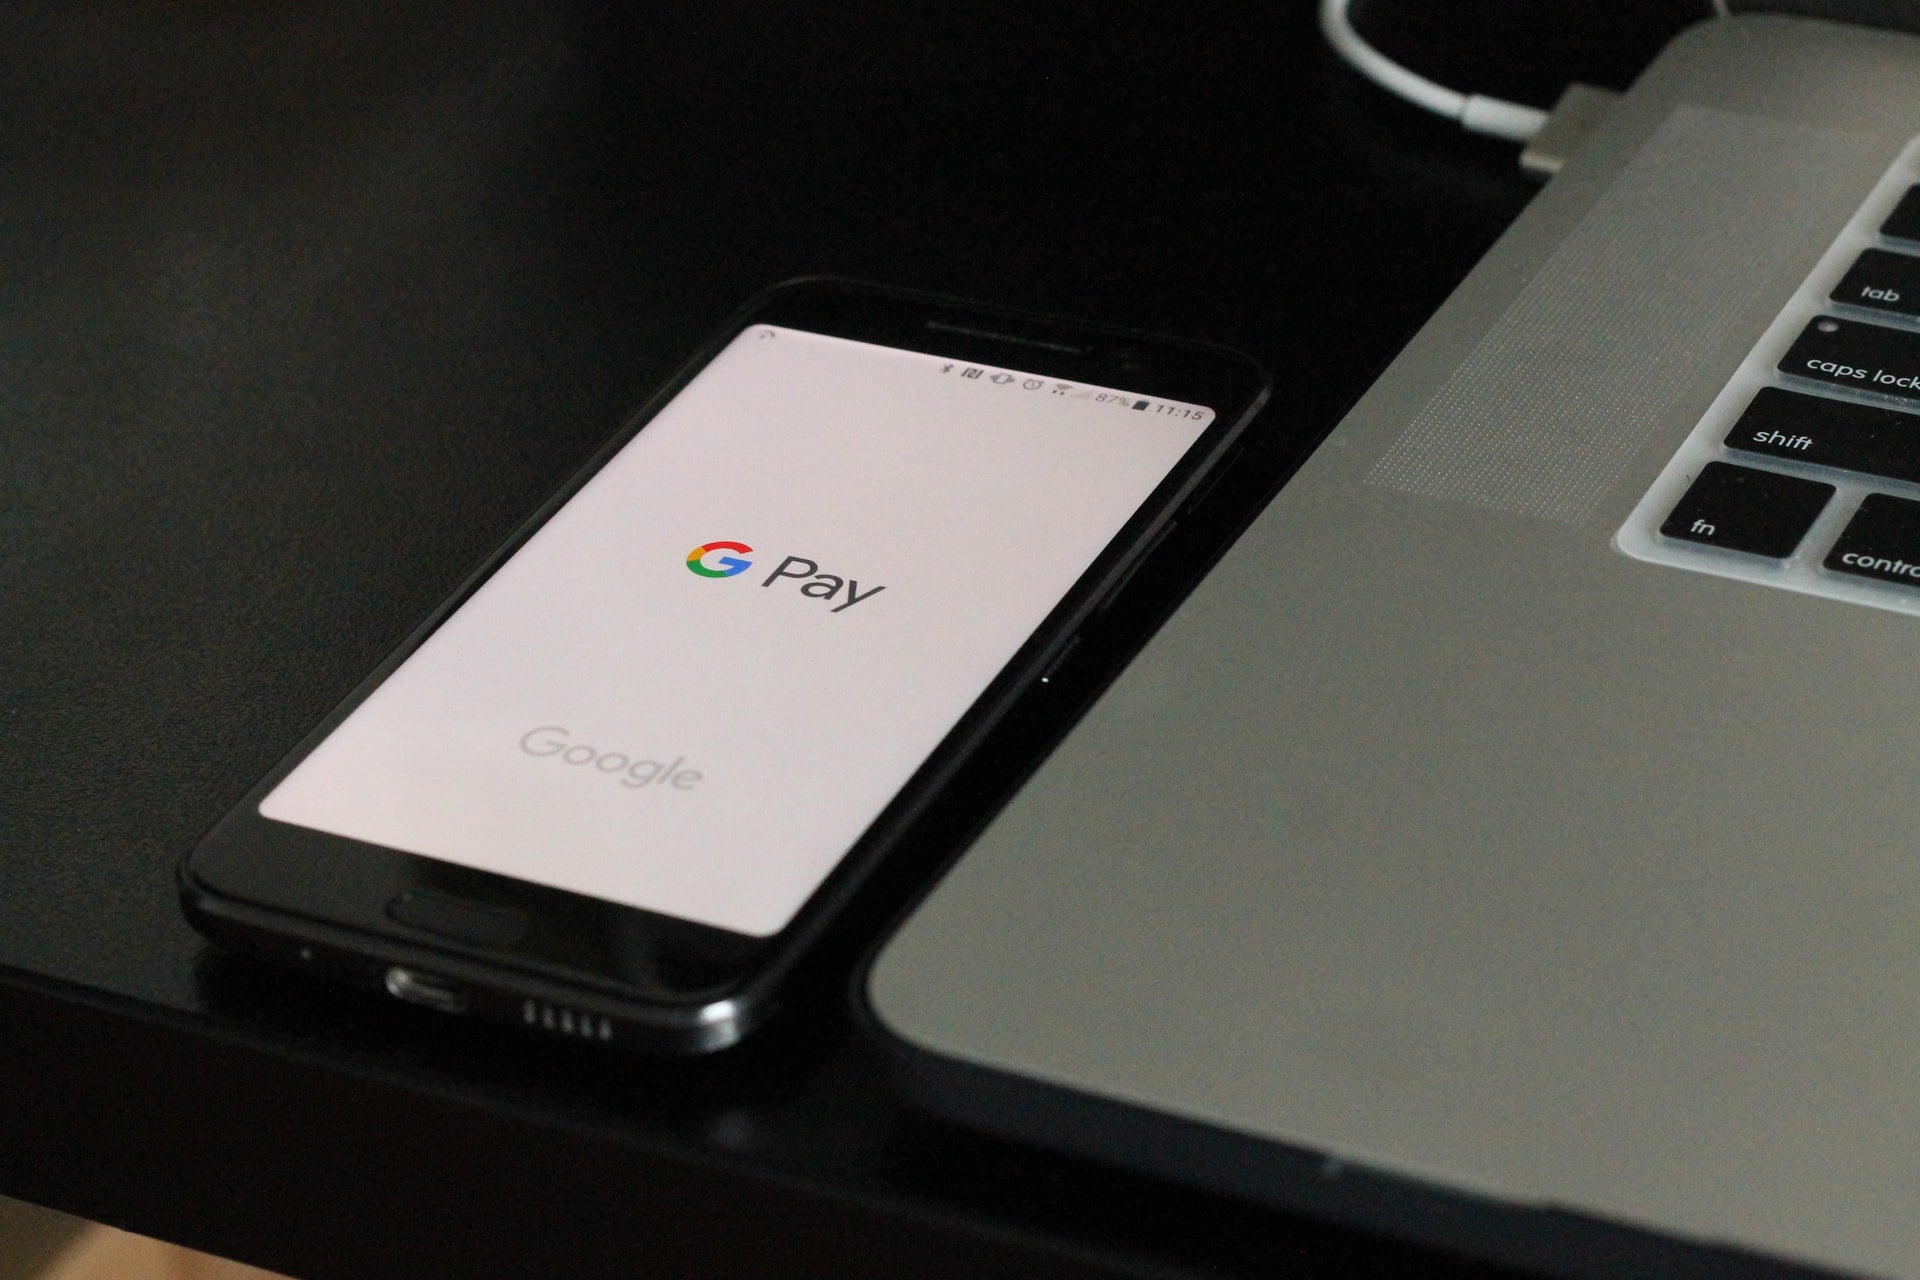 Apple, Google eliminate MIR card loophole for mobile payments